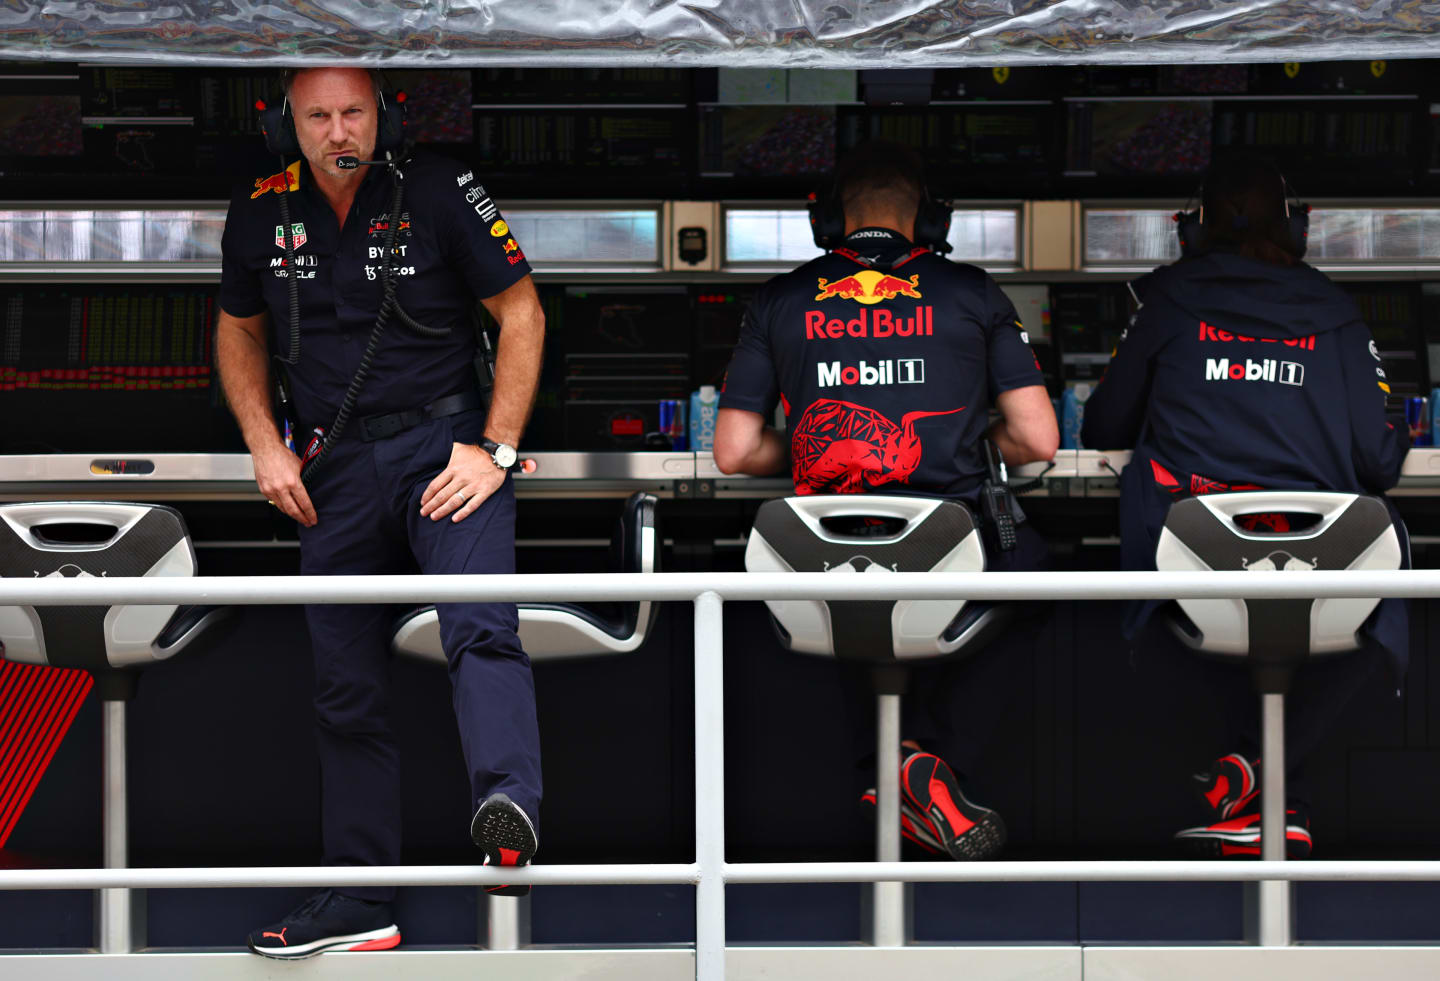 BUDAPEST, HUNGARY - JULY 30: Red Bull Racing Team Principal Christian Horner looks on from the pitwall during qualifying ahead of the F1 Grand Prix of Hungary at Hungaroring on July 30, 2022 in Budapest, Hungary. (Photo by Mark Thompson/Getty Images)